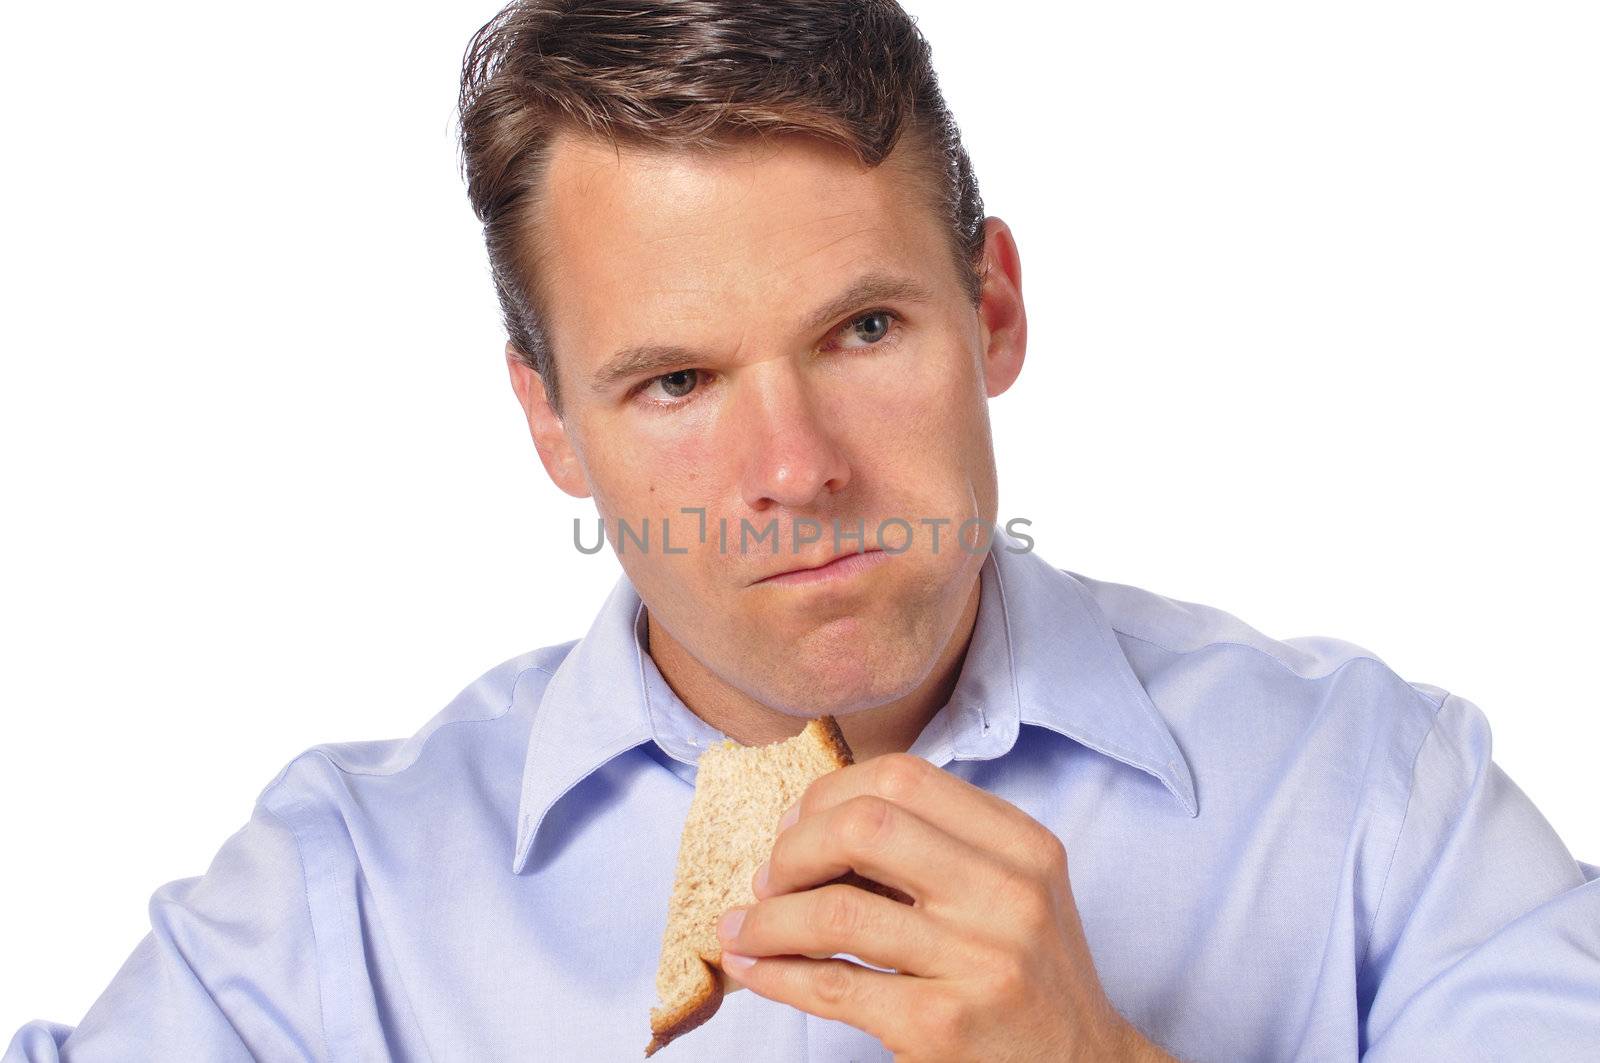 Closeup of man eating a sandwich on white background